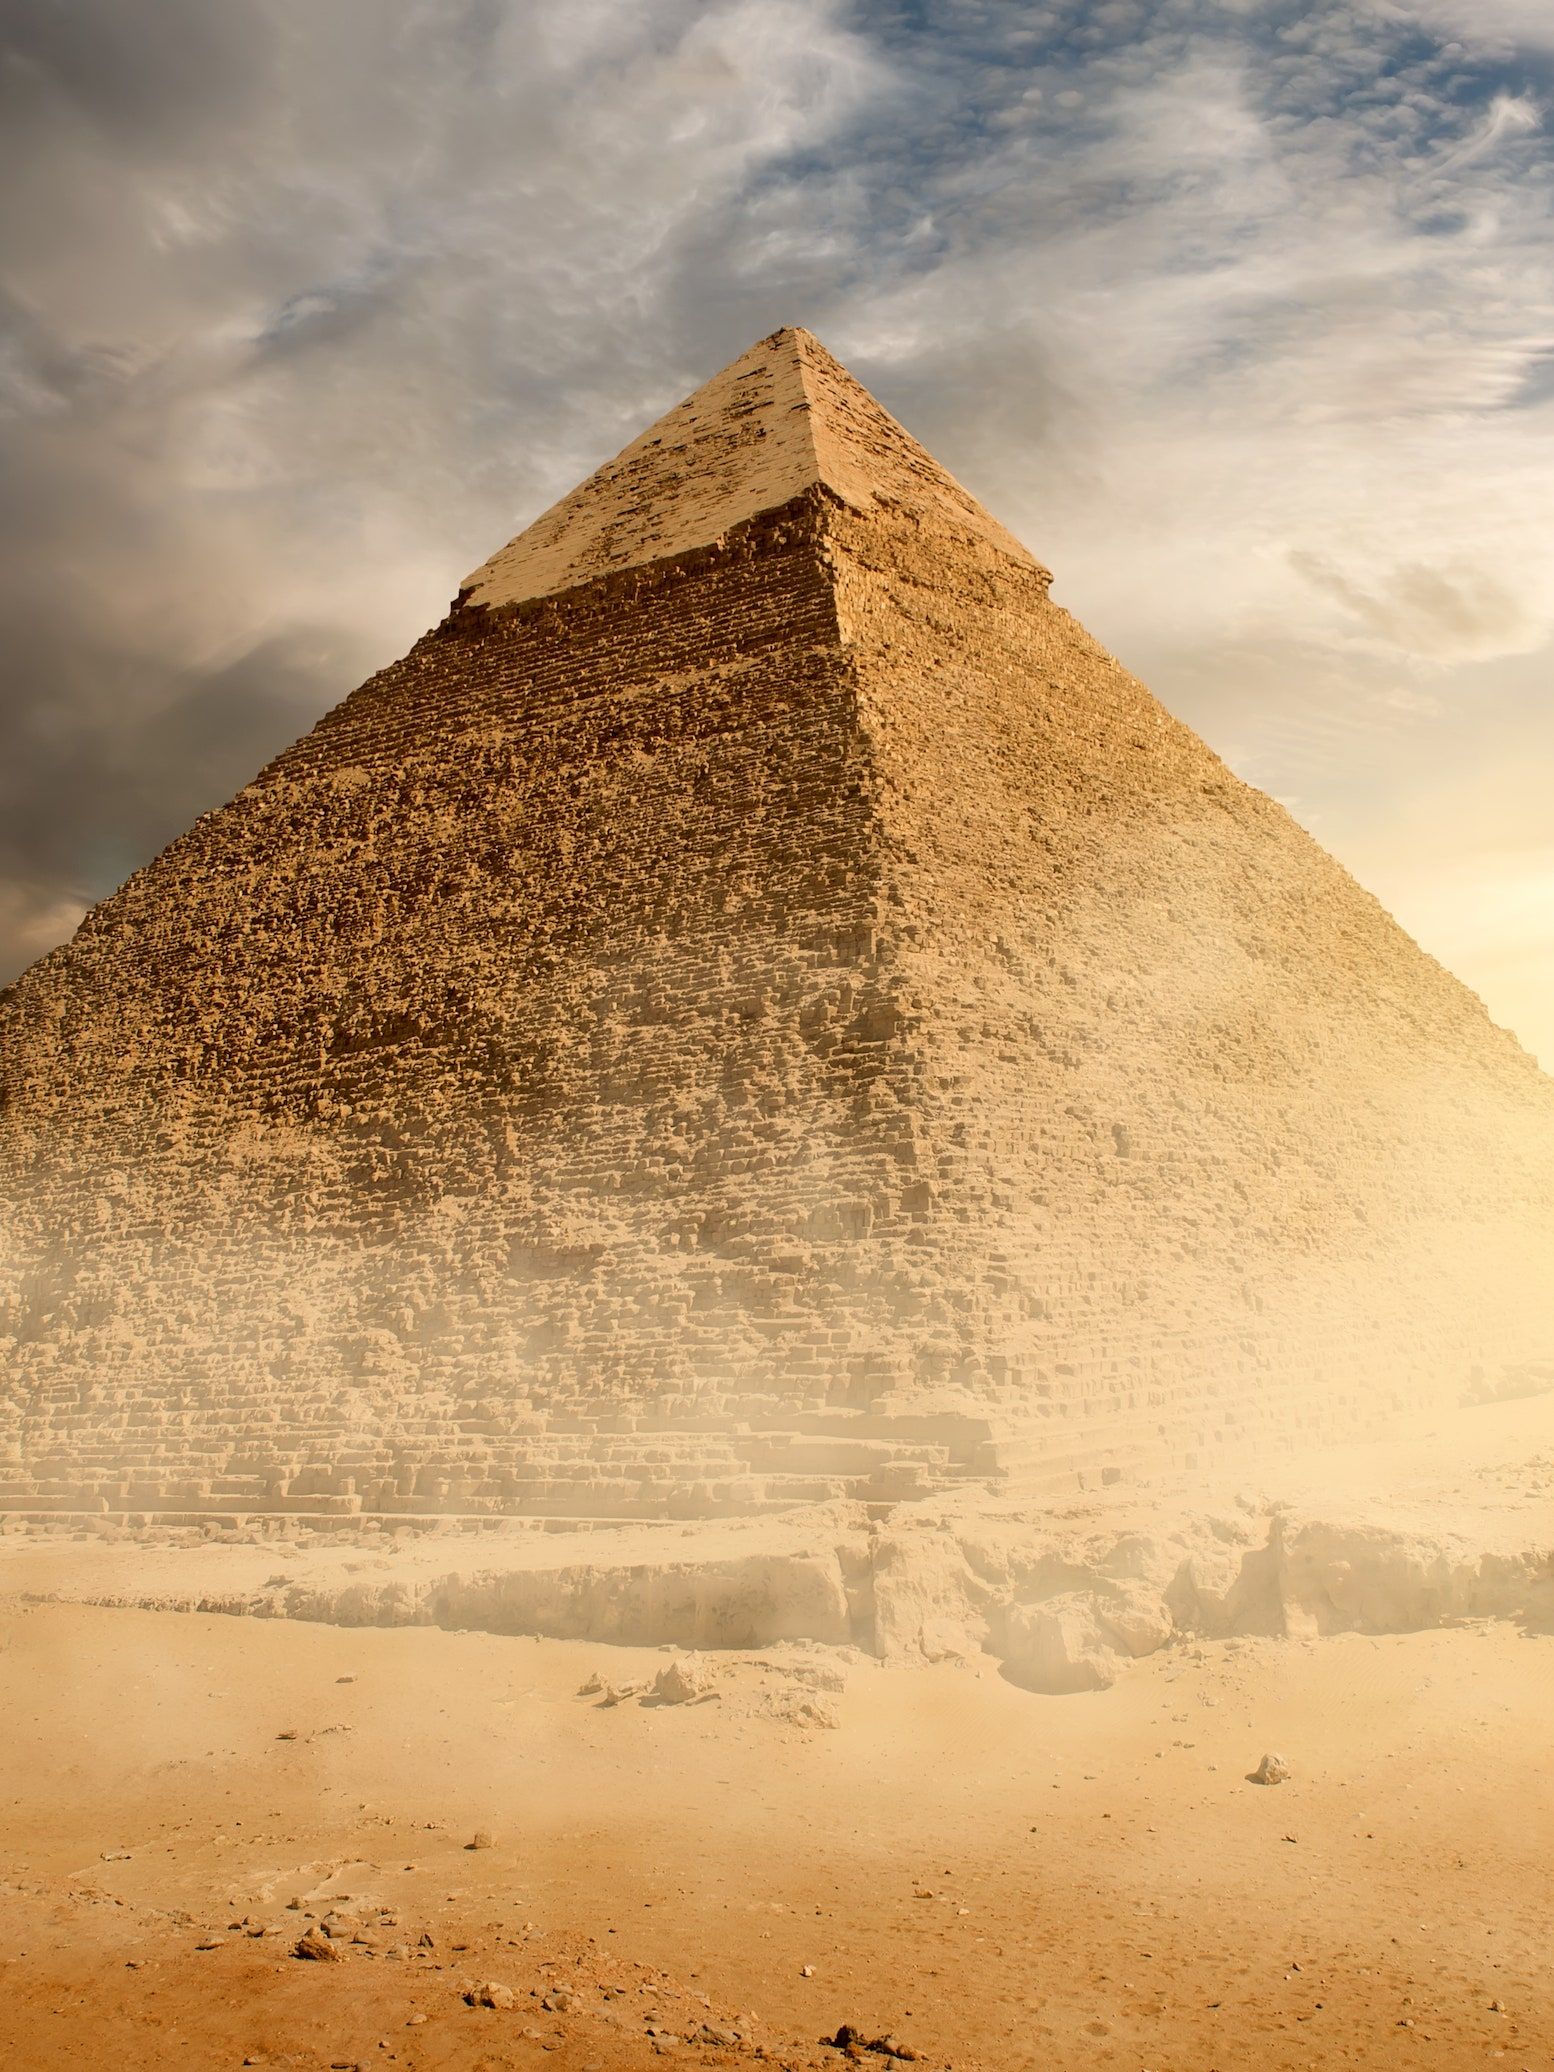 The Great Pyramid of Giza Has a Newly Discovered Secret Chamber